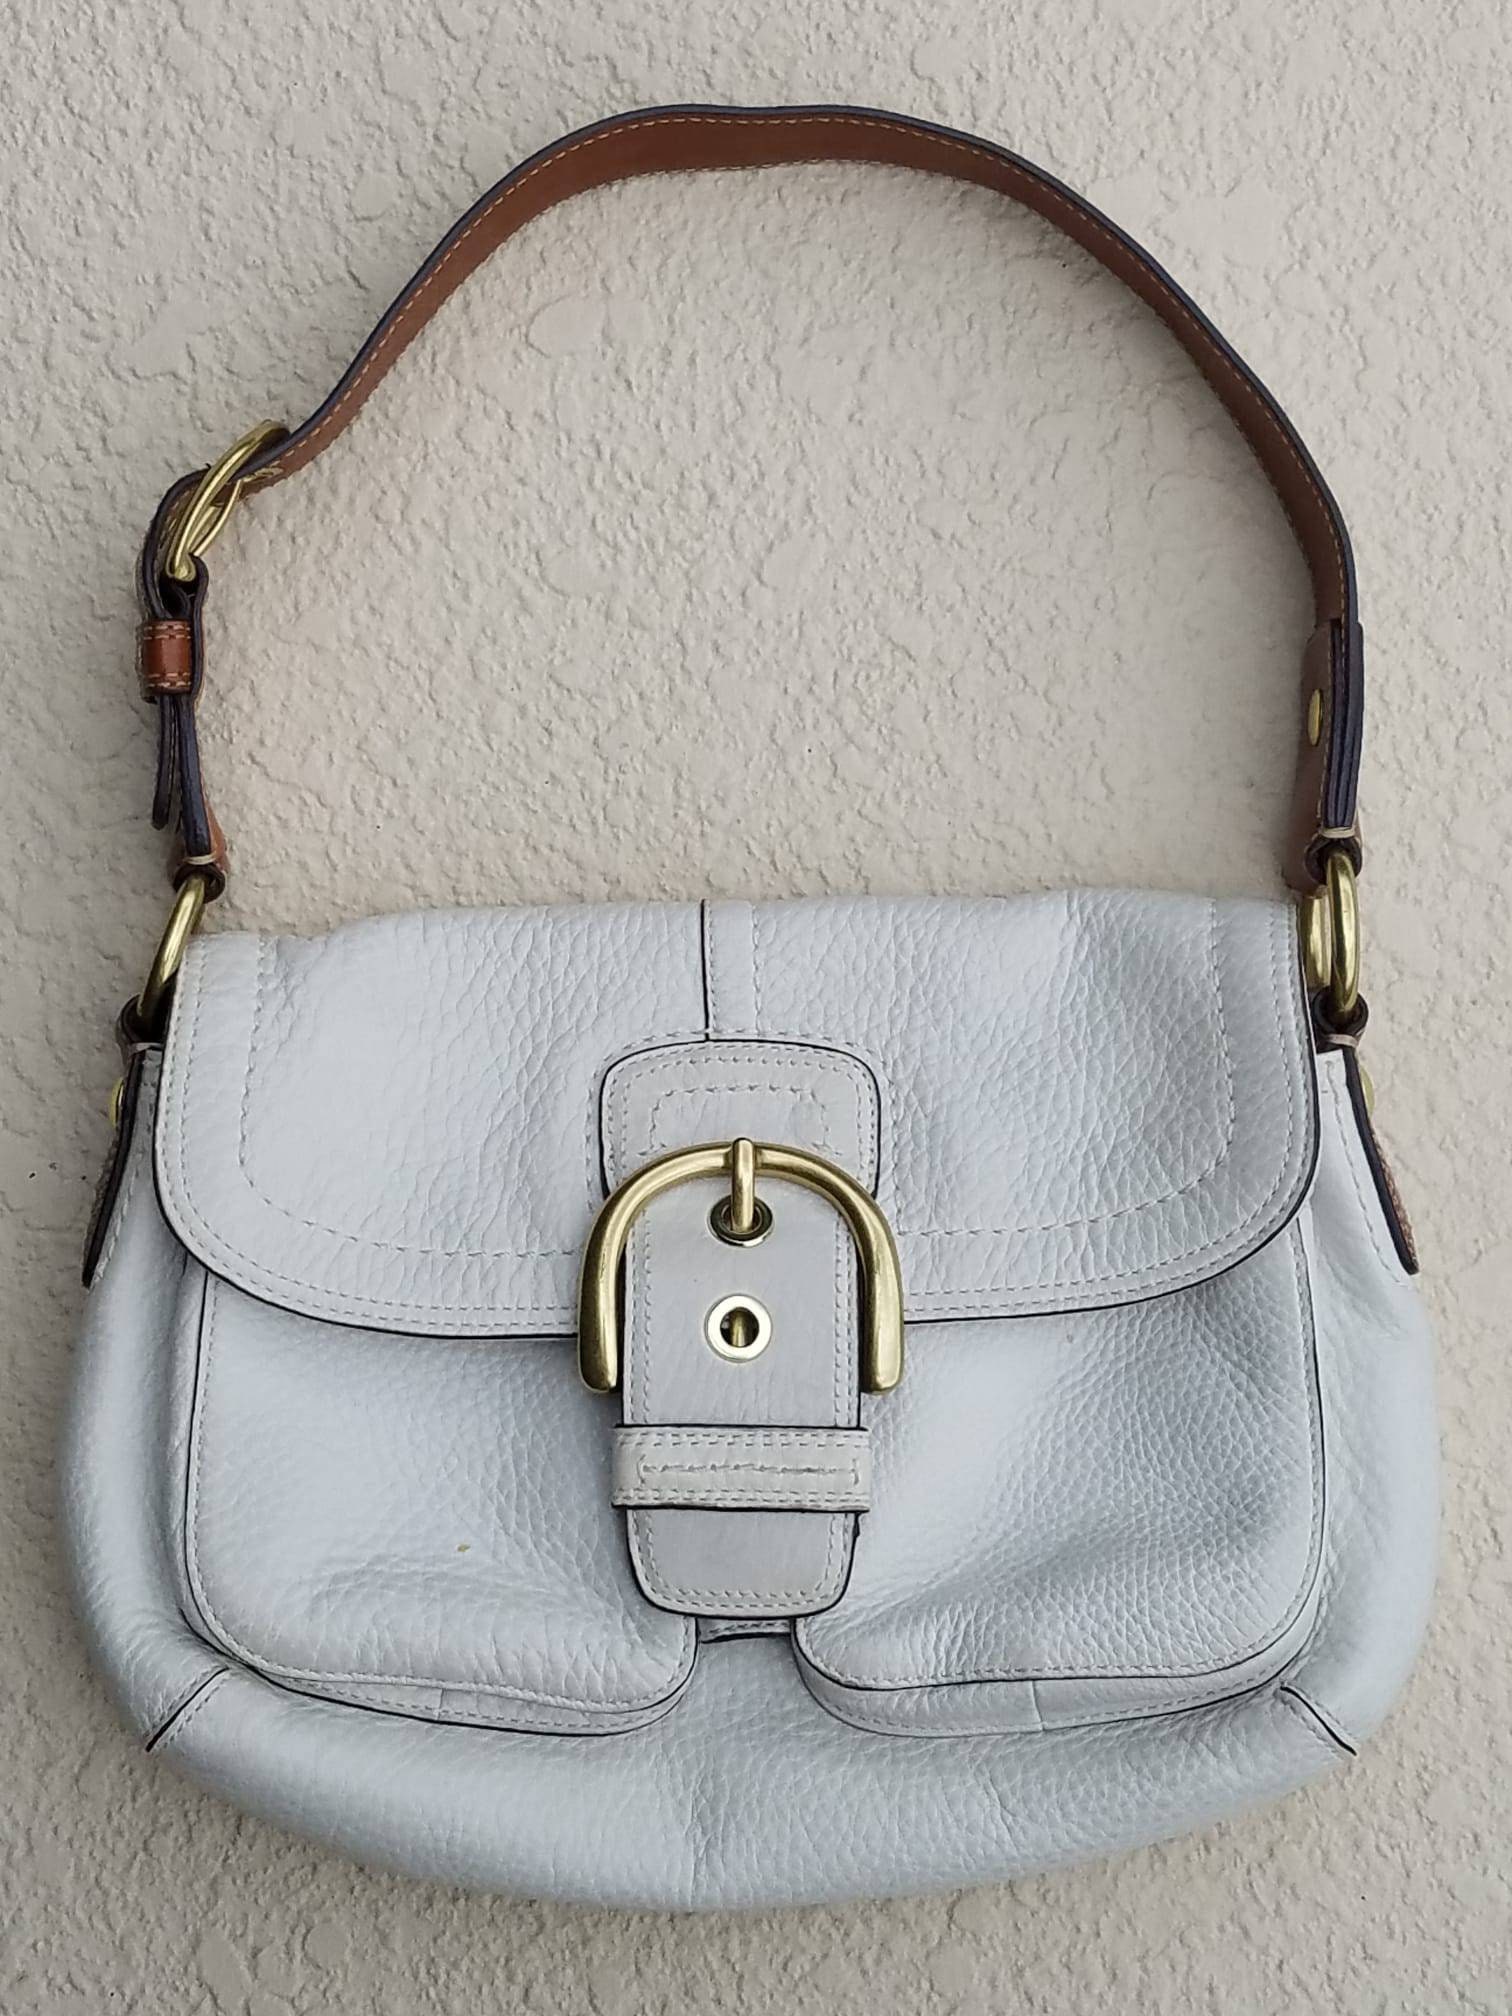 Coach Soho Hobo Flap Minibag  Vintage coach bags, Fancy bags, Girlie  outfits